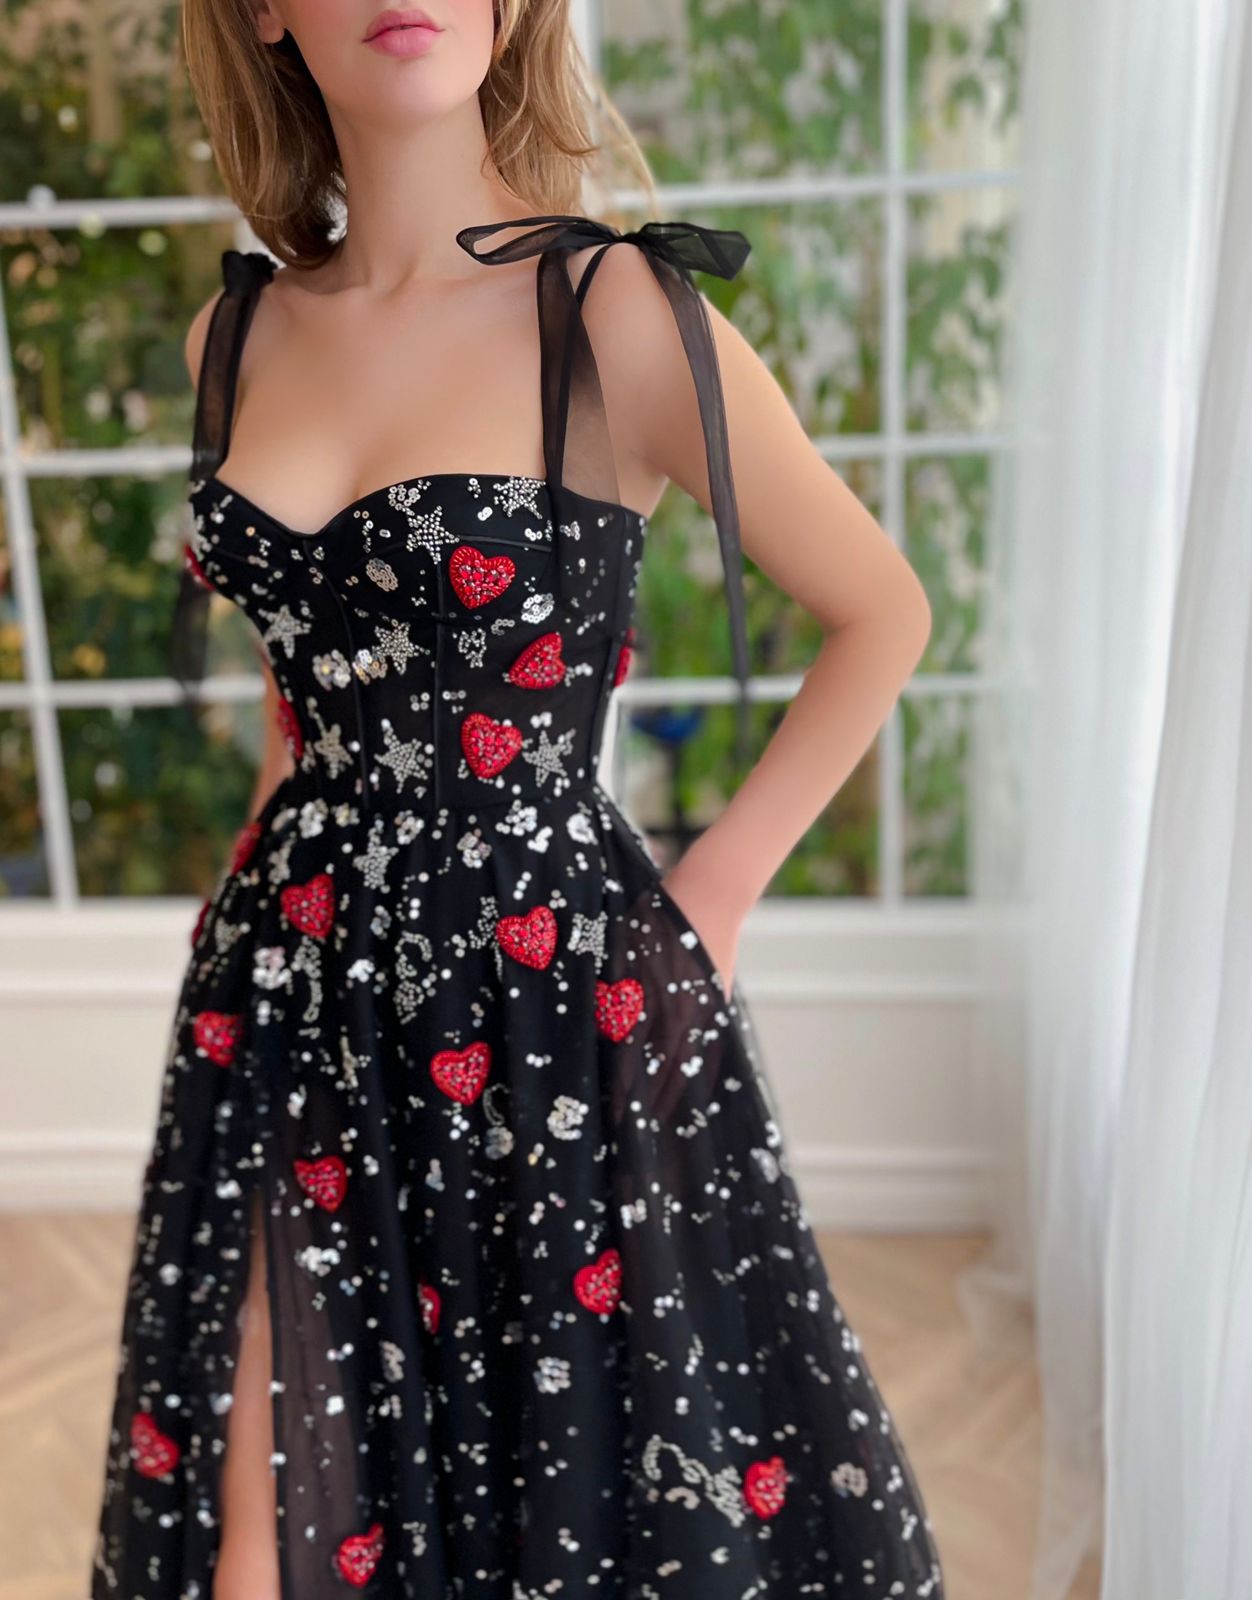 Black A-Line dress with bow straps and printed fabric